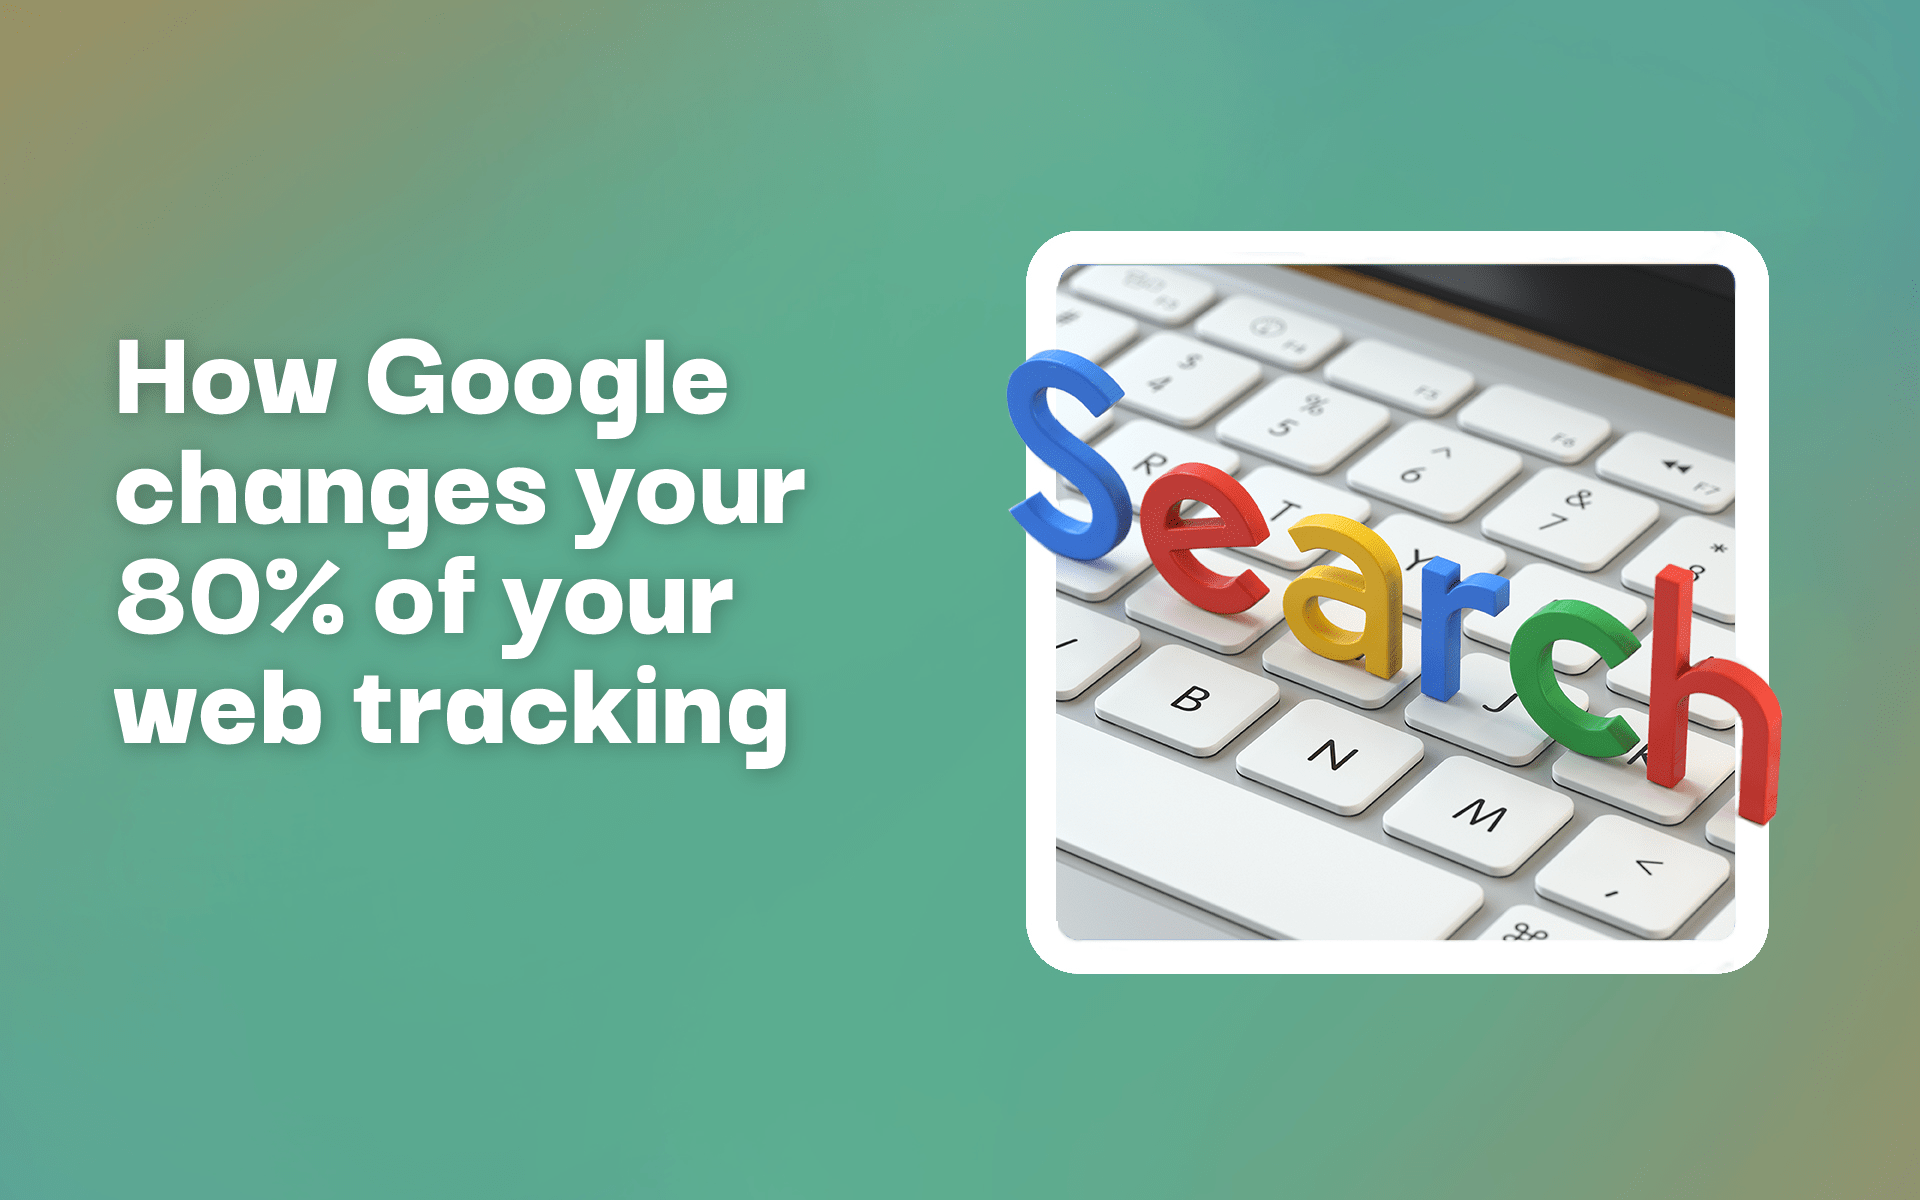 Google changes your web tracking